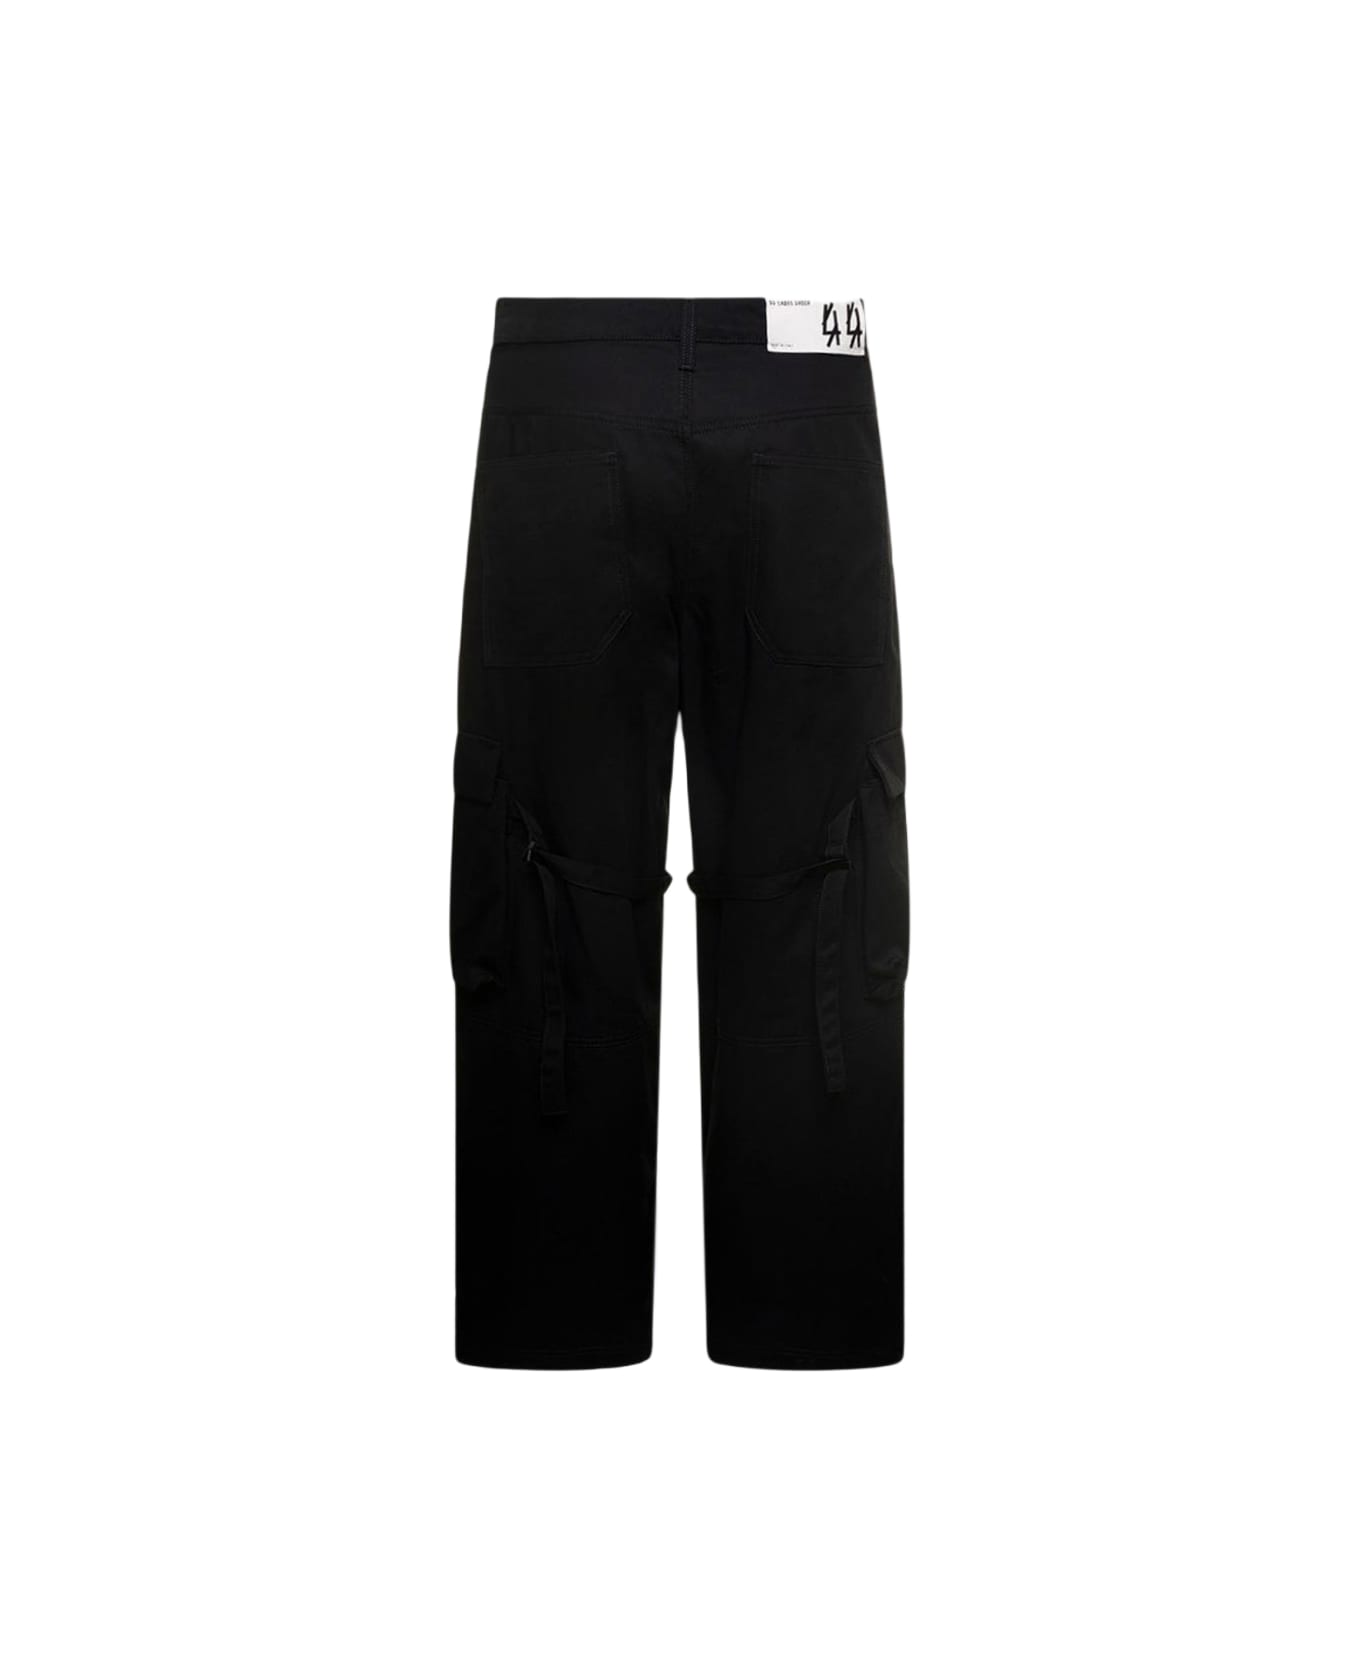 44 Label Group Black And White Cotton Cargo Pants - Black